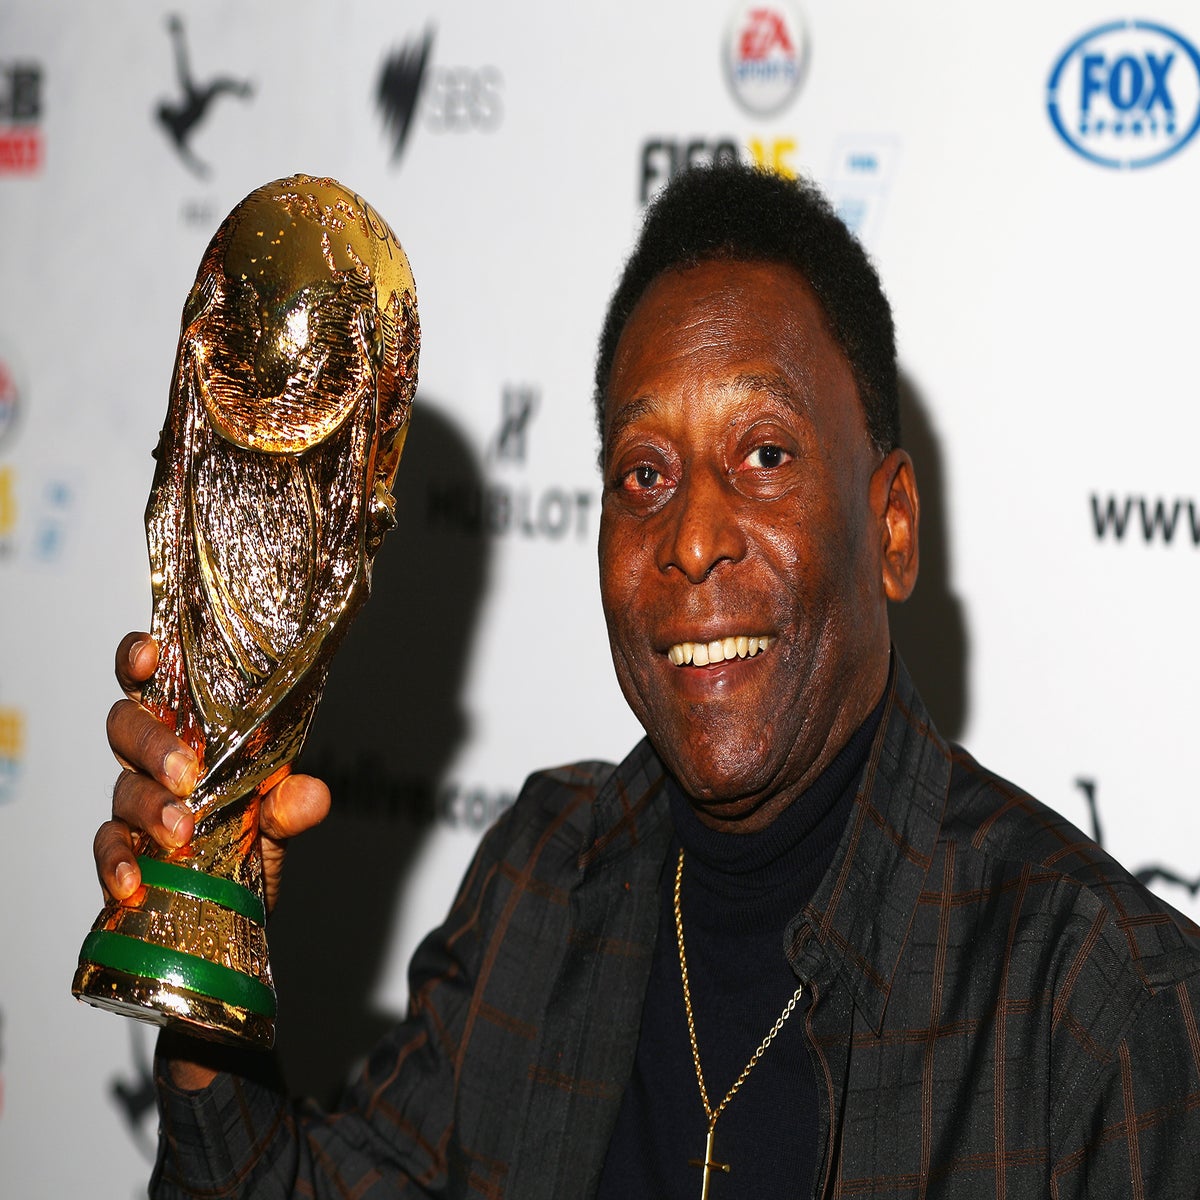 Pelé has been voted the greatest footballer of all time, The Independent